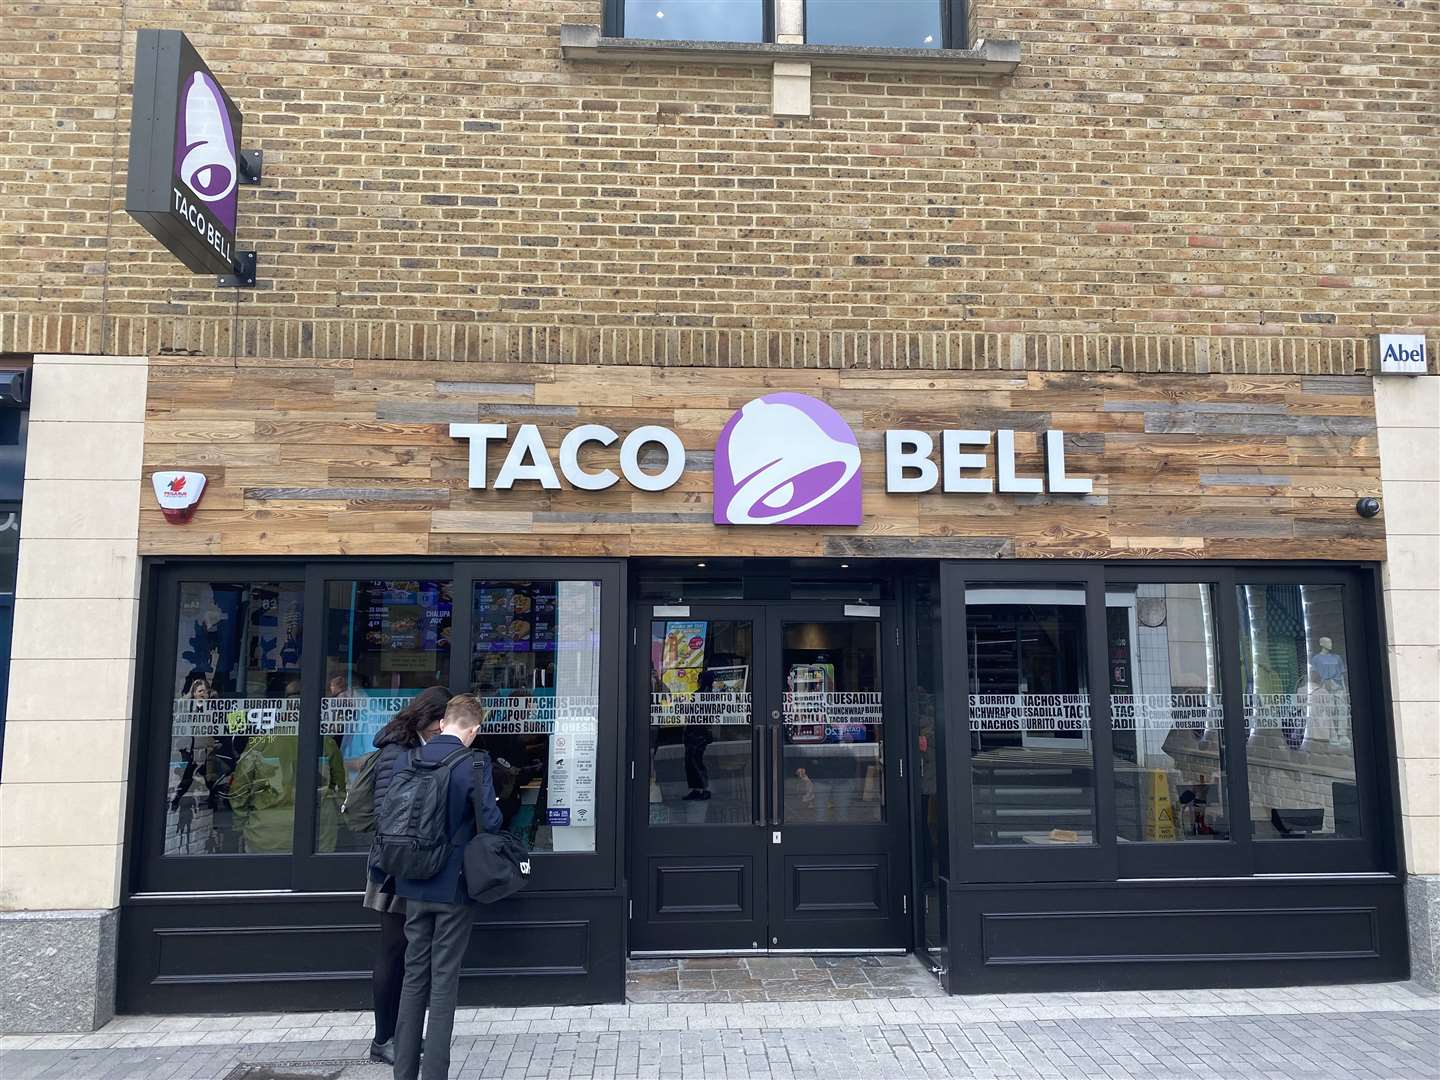 Another Taco Bell opened in Maidstone earlier this year